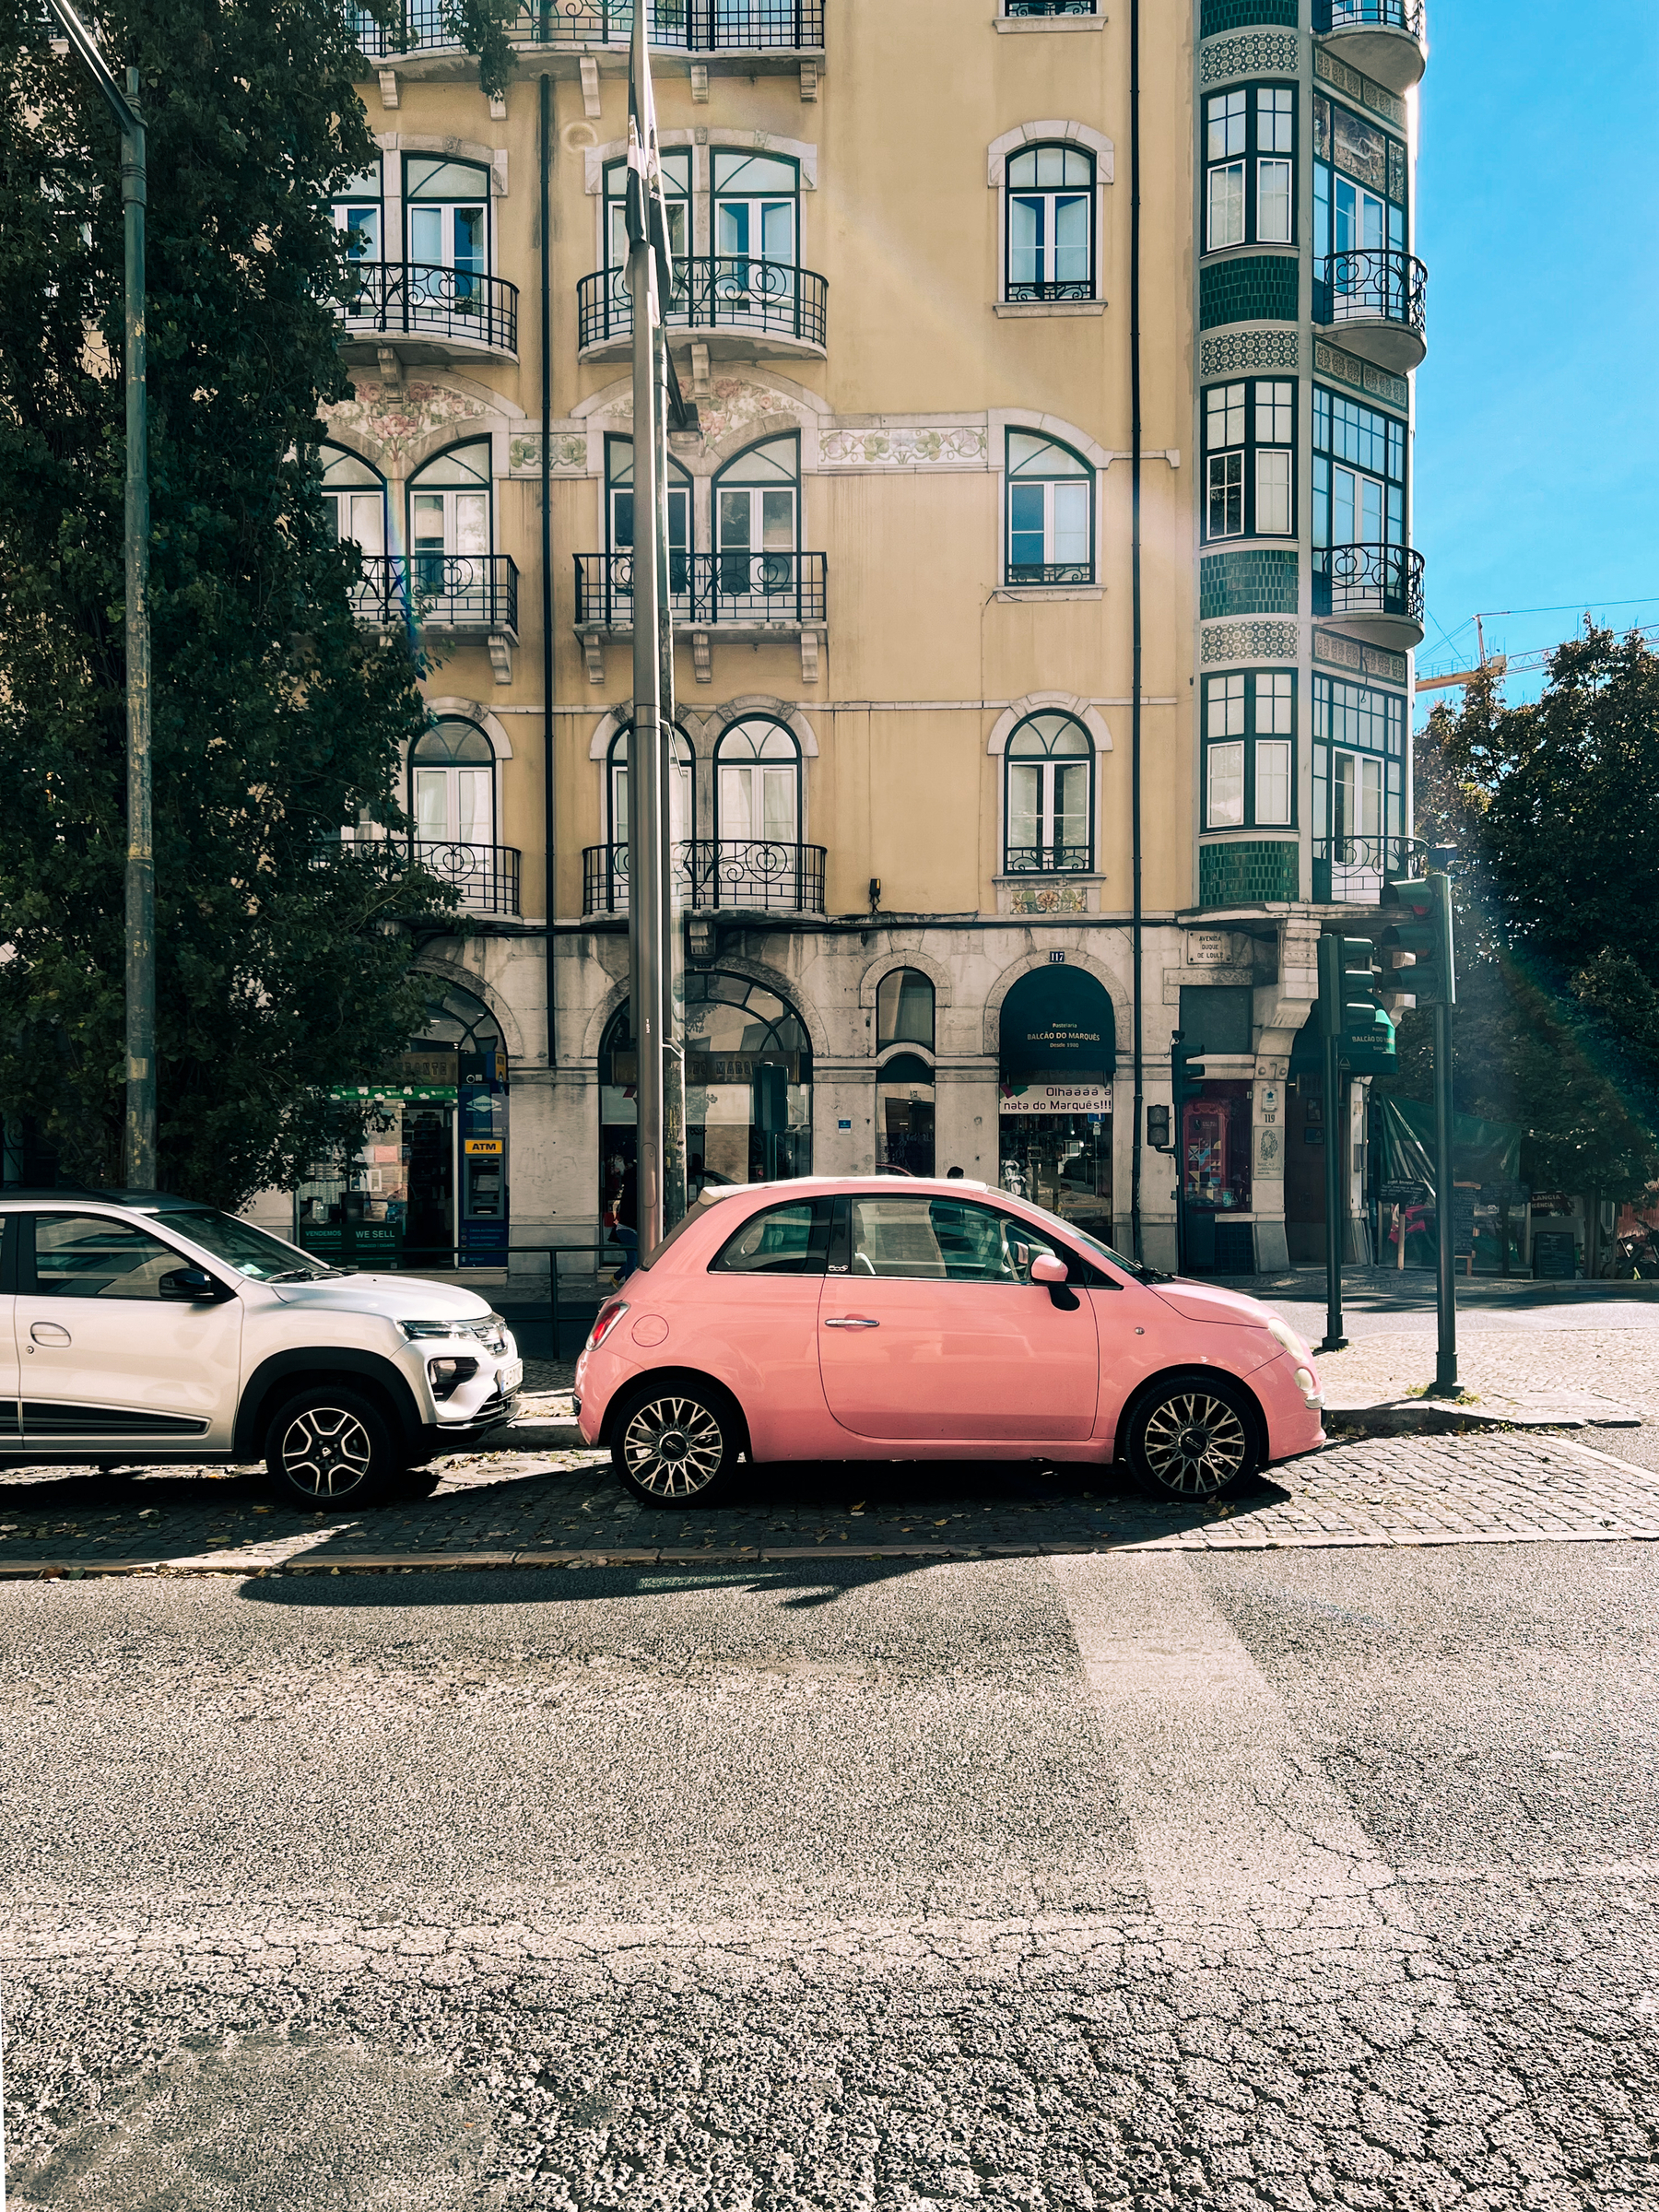 A parked pink car.